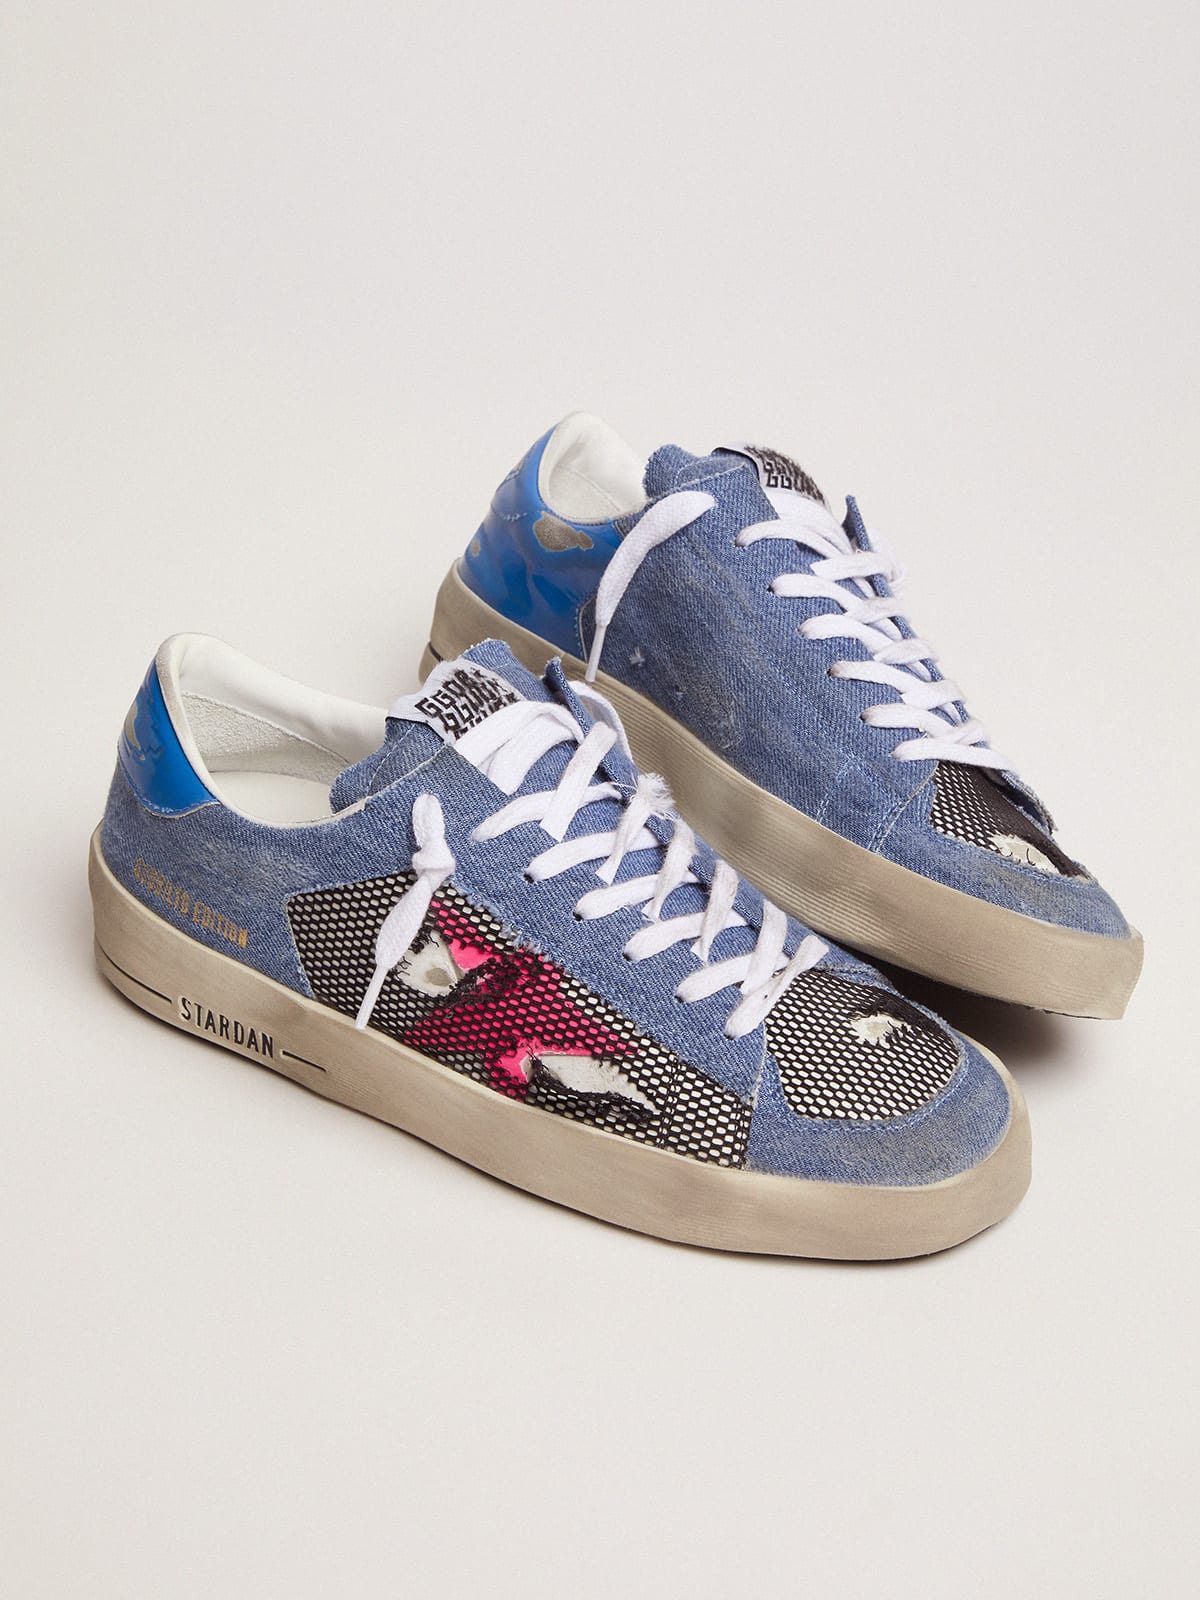 Golden Goose - Women's Limited Edition LAB denim Stardan sneakers with fuchsia star in 